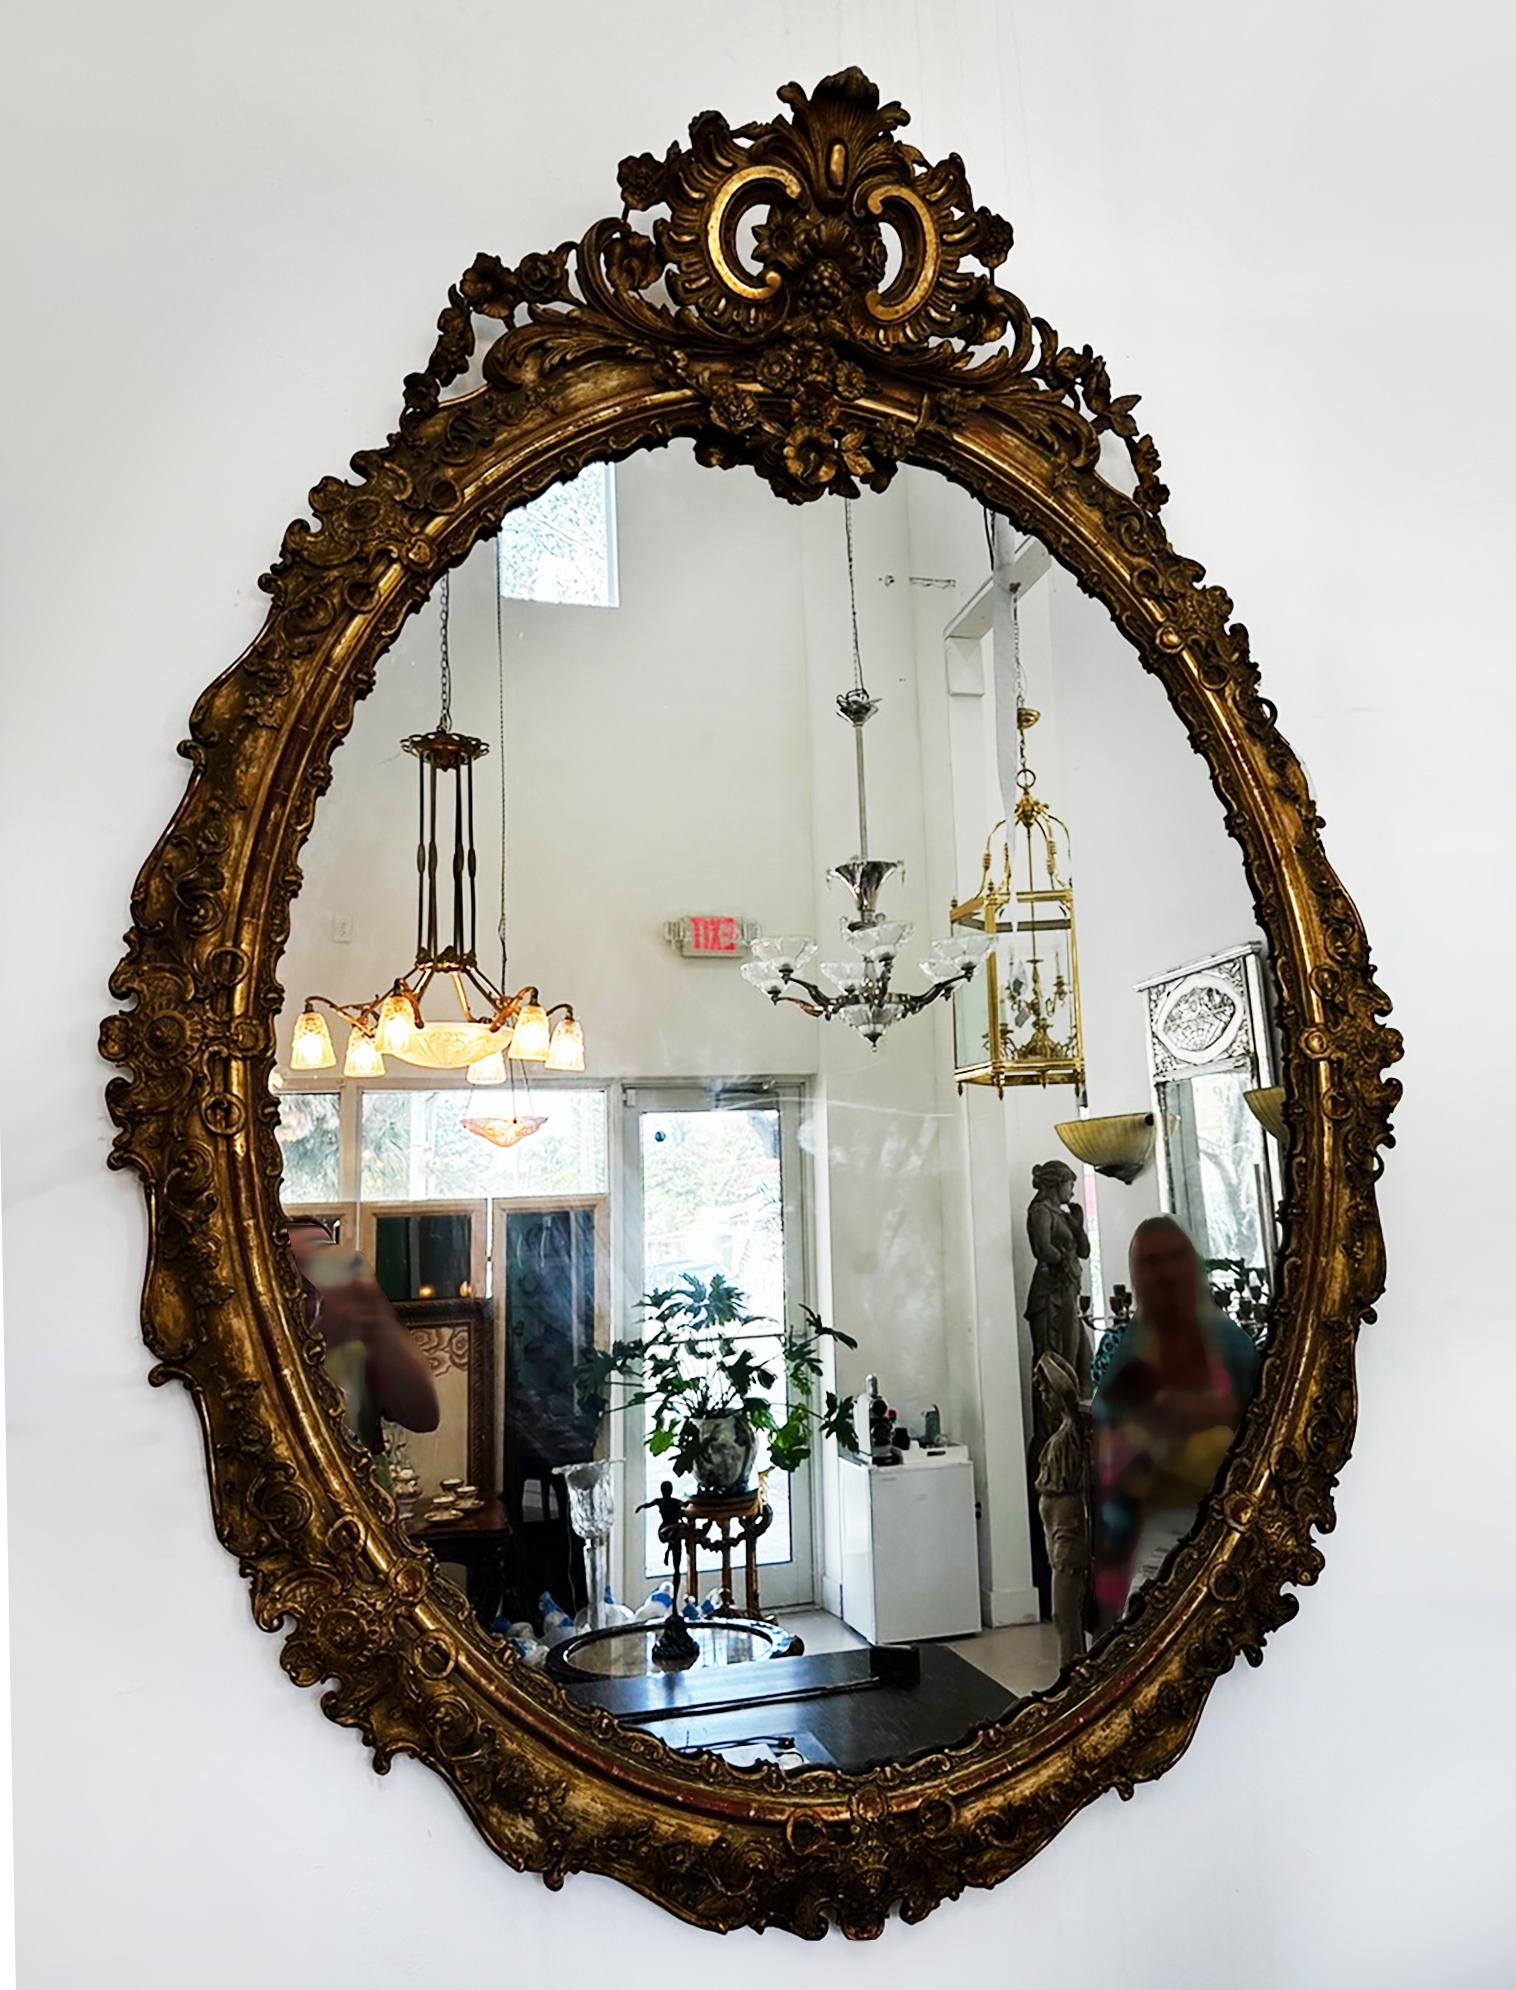 Monumental European Oval Giltwood Gesso Mirror, Late 19th-Early 20th Century For Sale 3